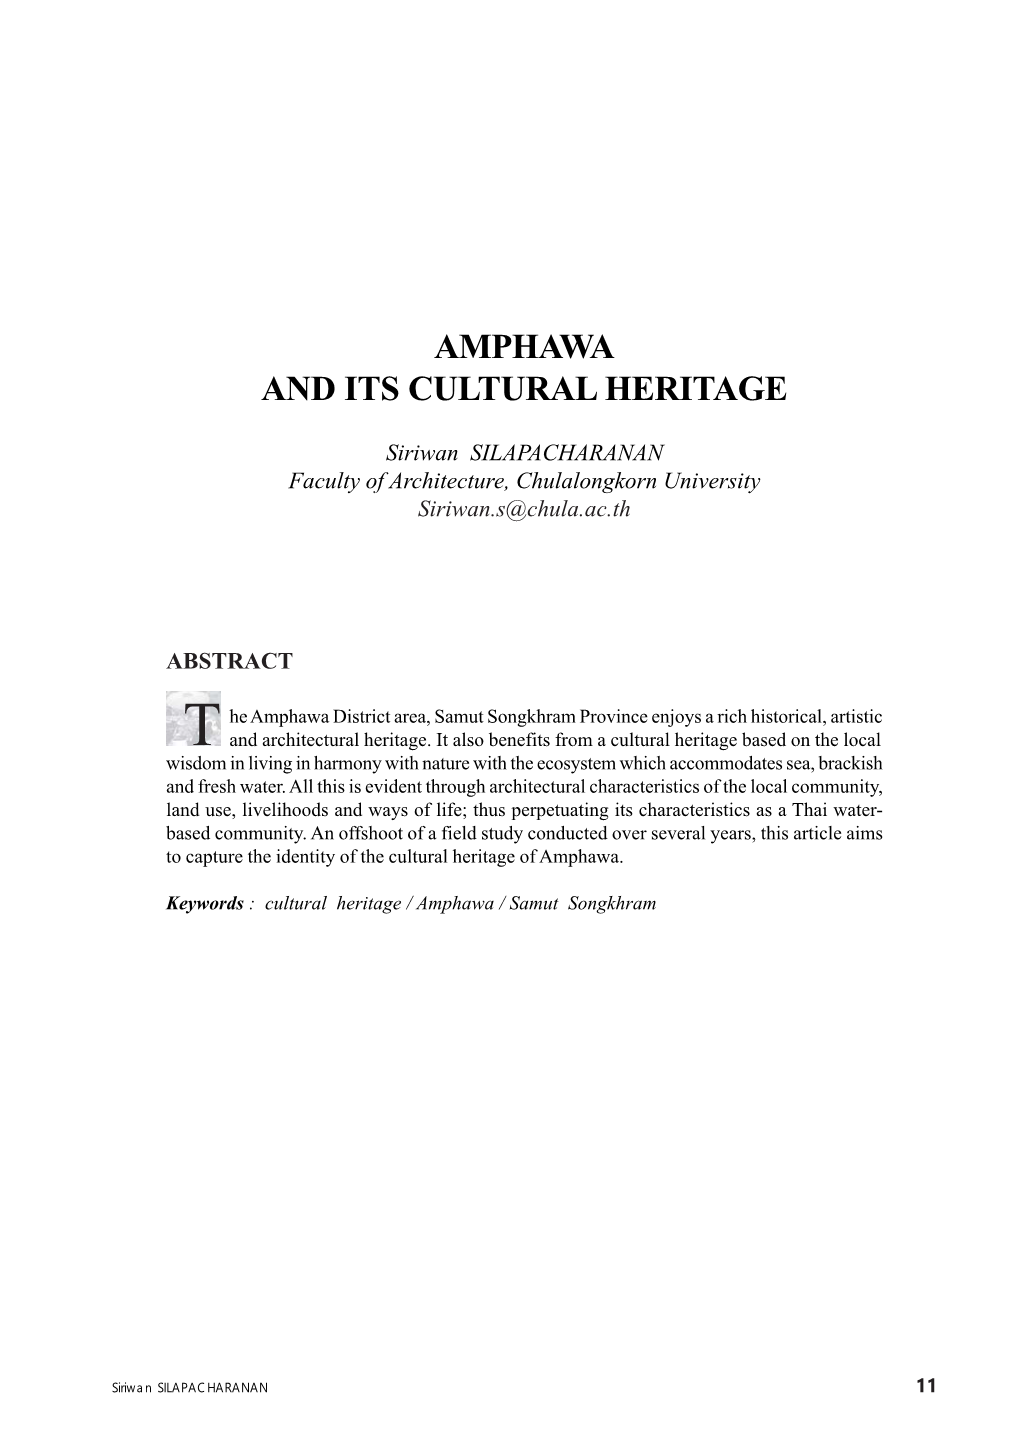 Amphawa and Its Cultural Heritage